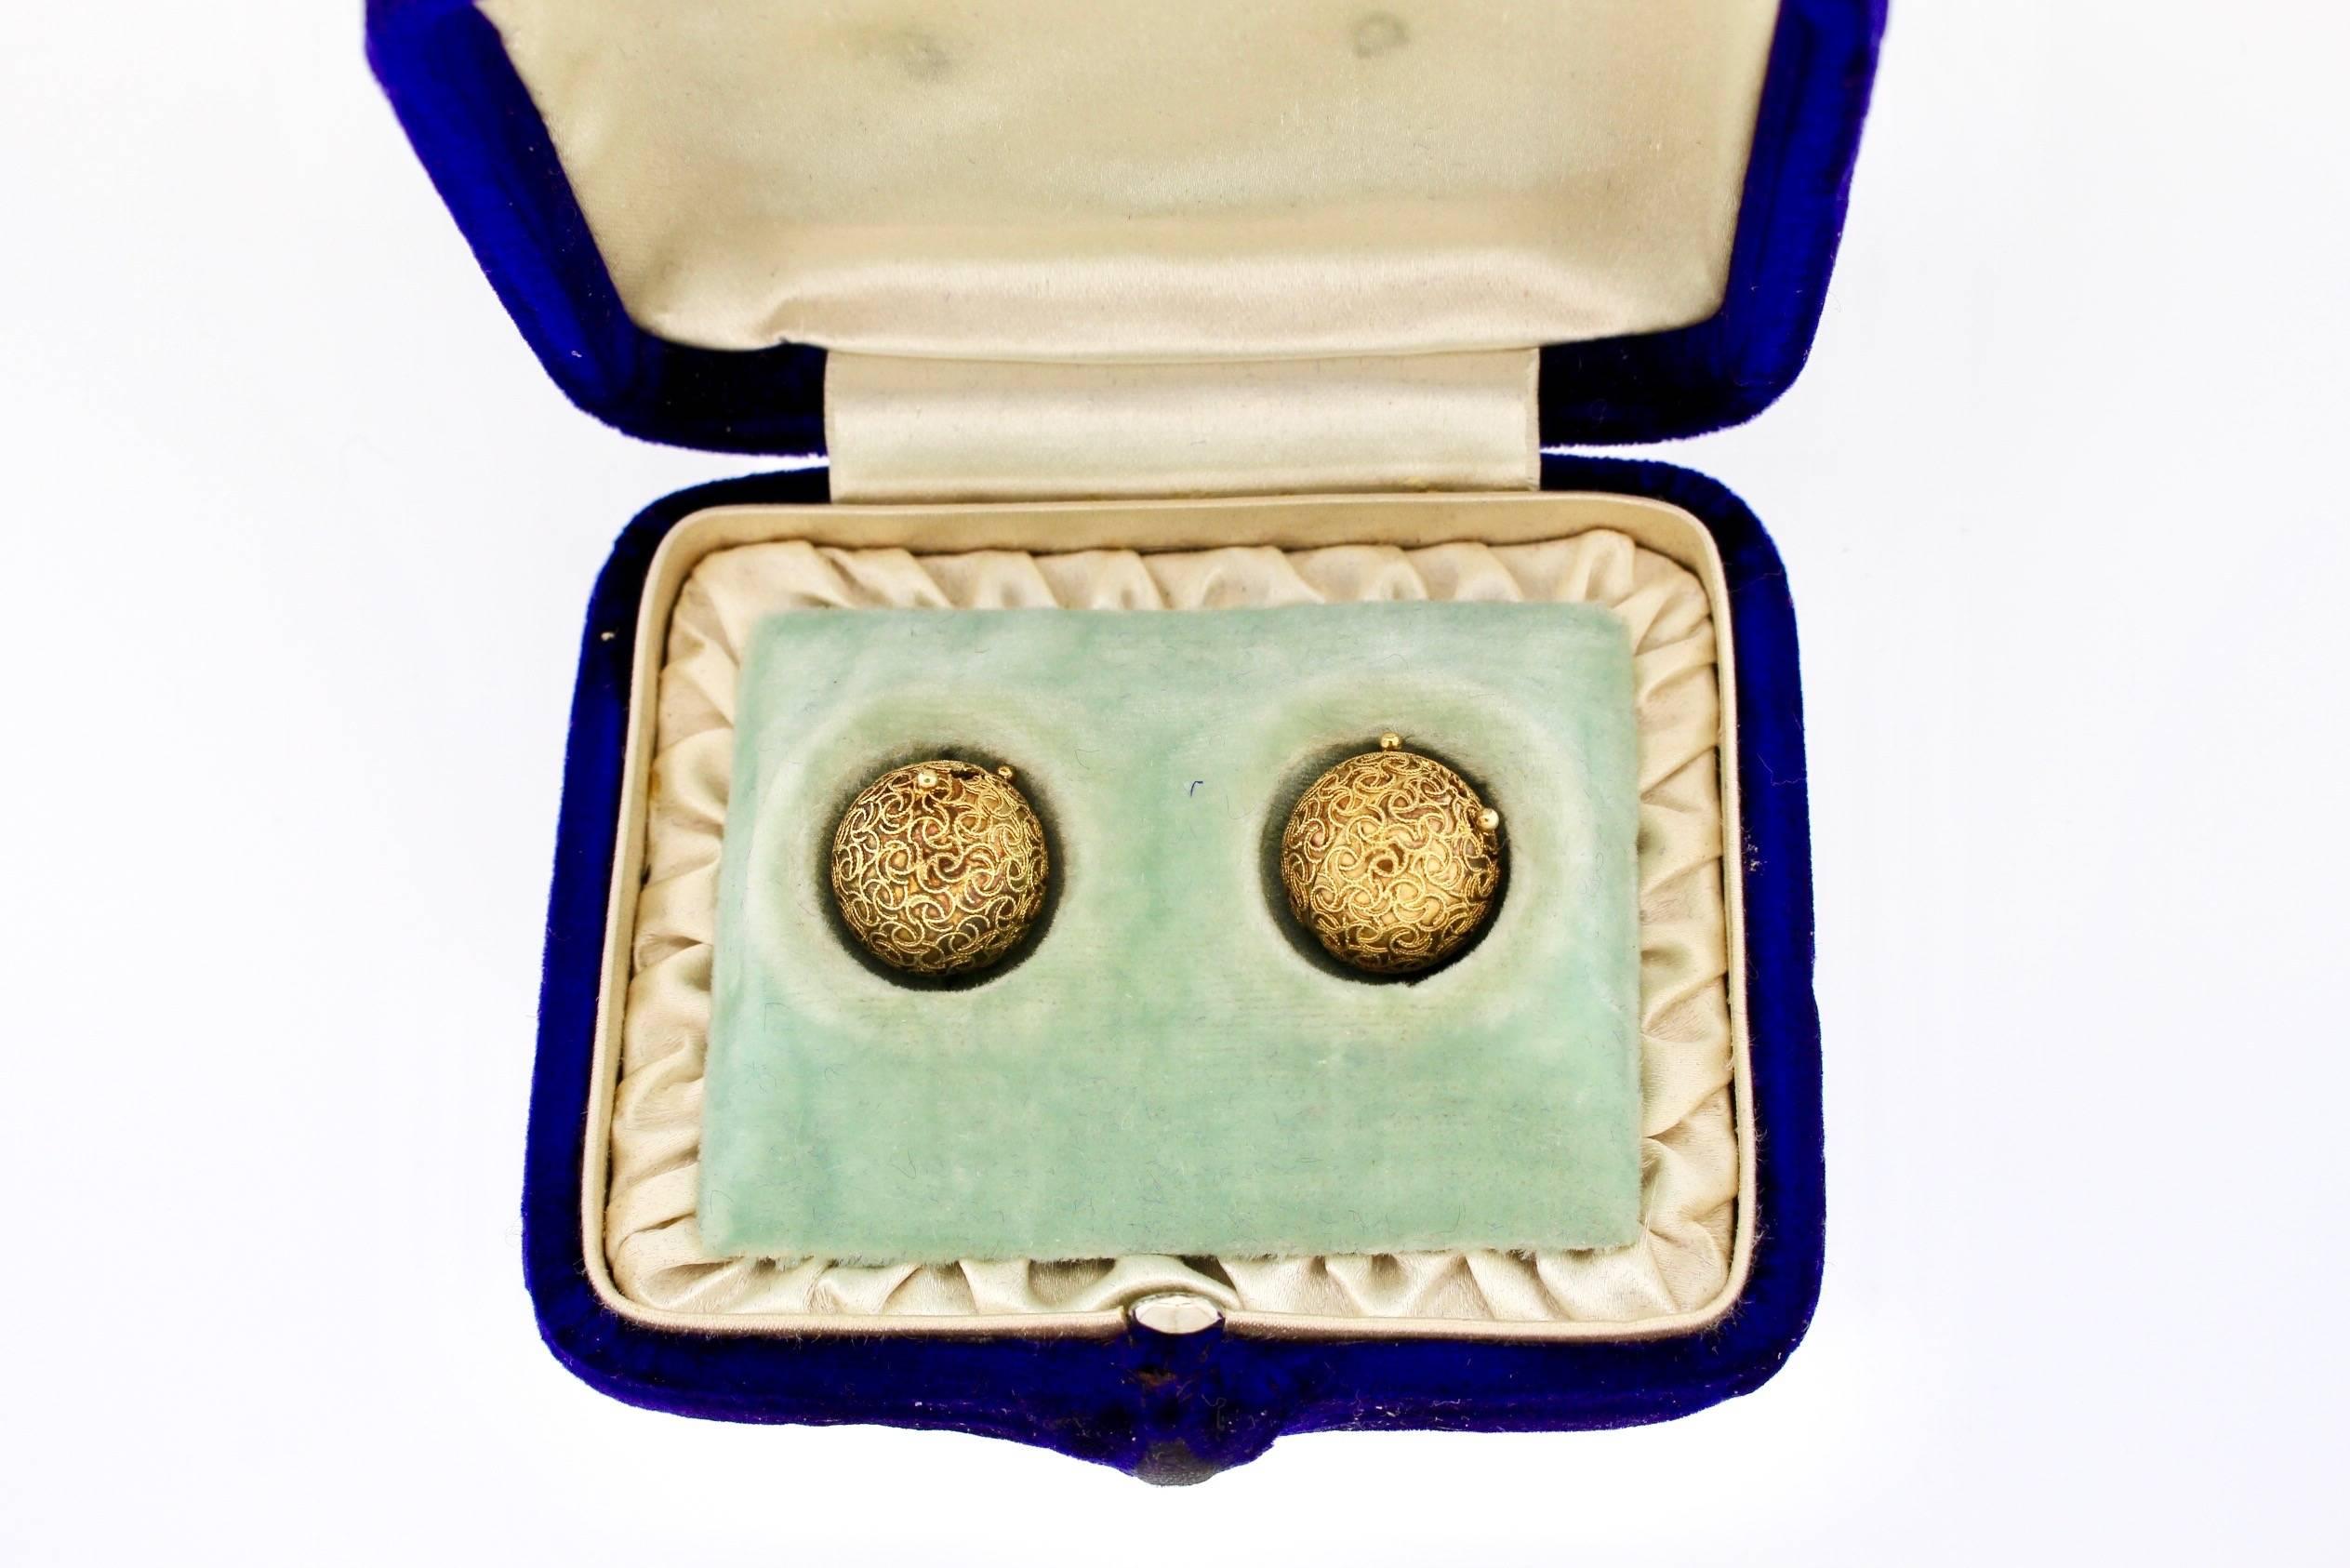 Original and unique, this boxed set of antique cut diamond earrings is accompanied by their original gold ball coach covers.  